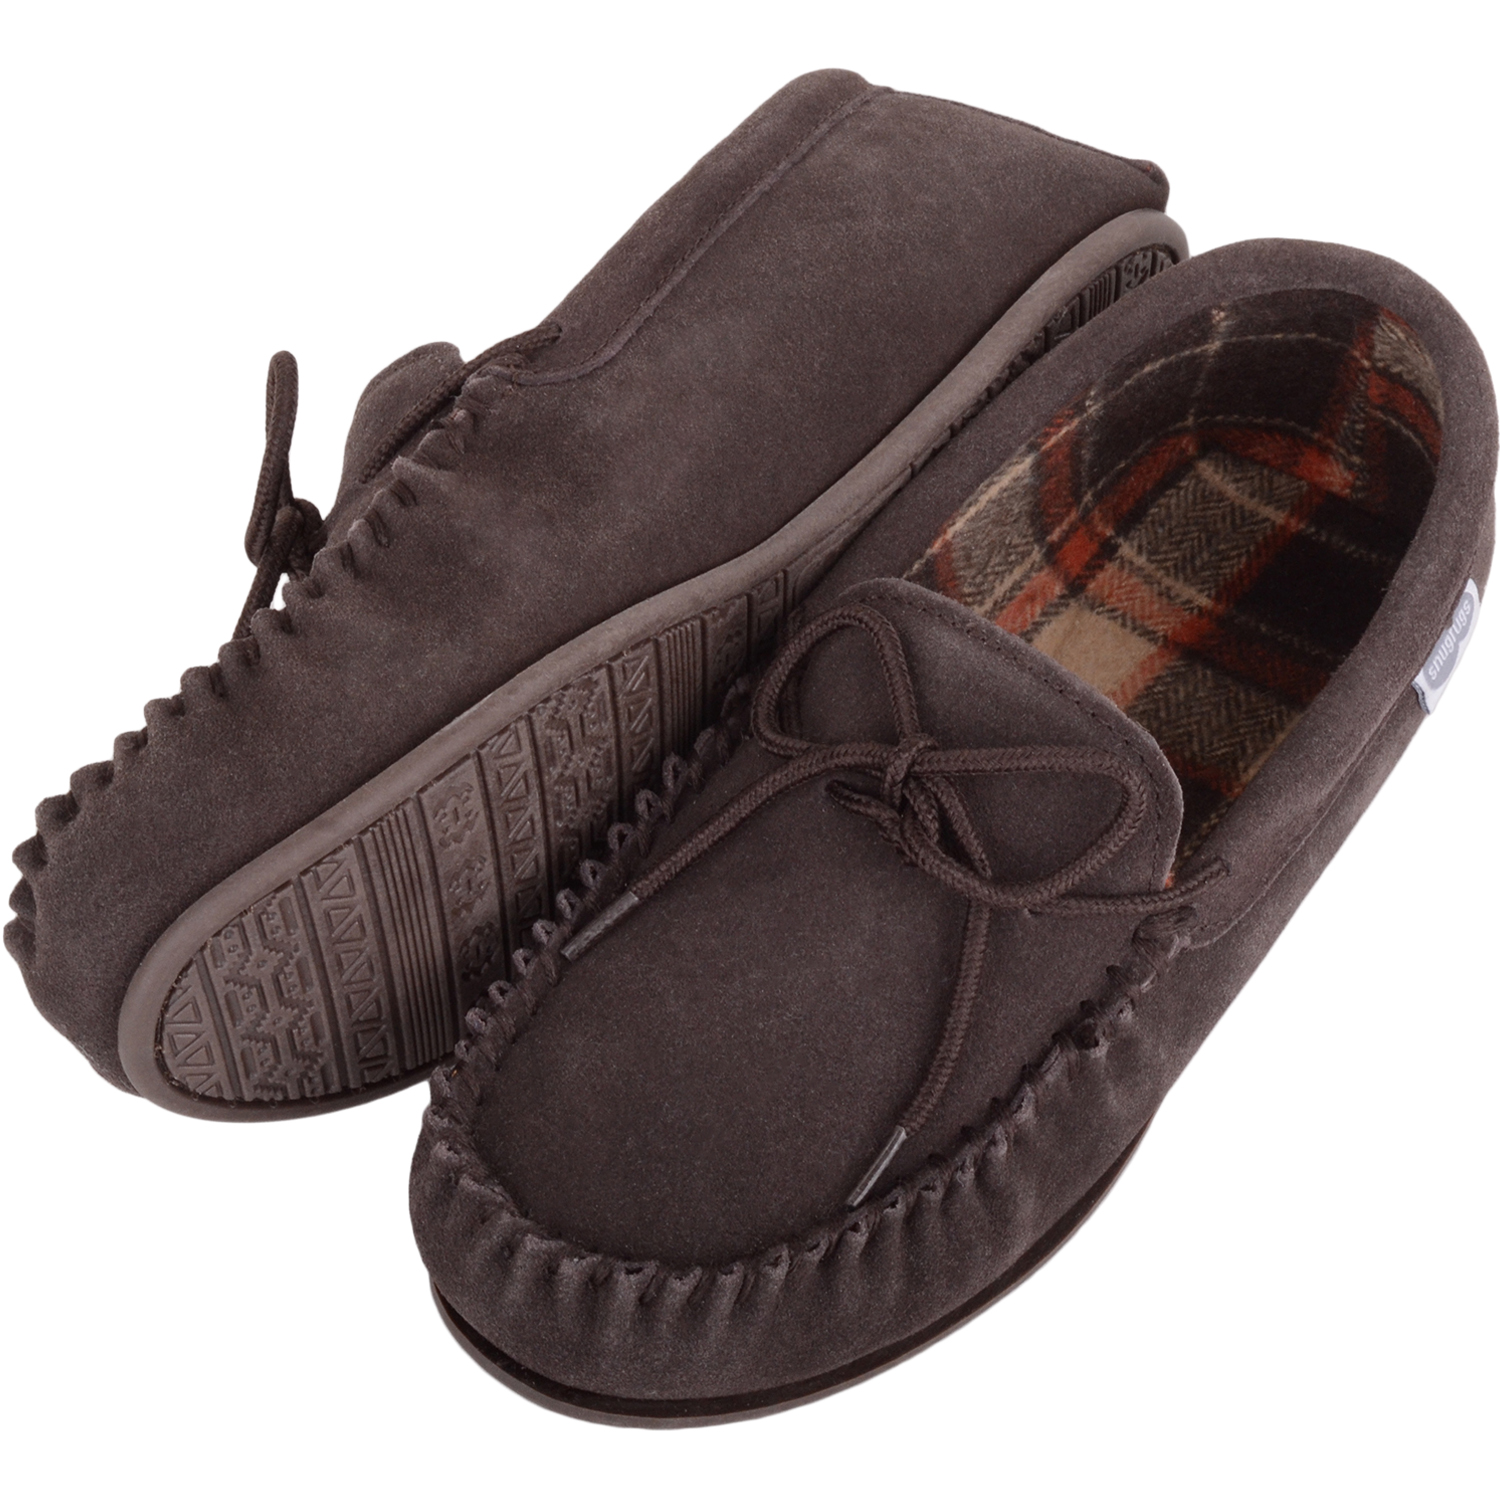 Men's Suede Moccasin Slipper - Soft Step - Cotton Lining - Snugrugs